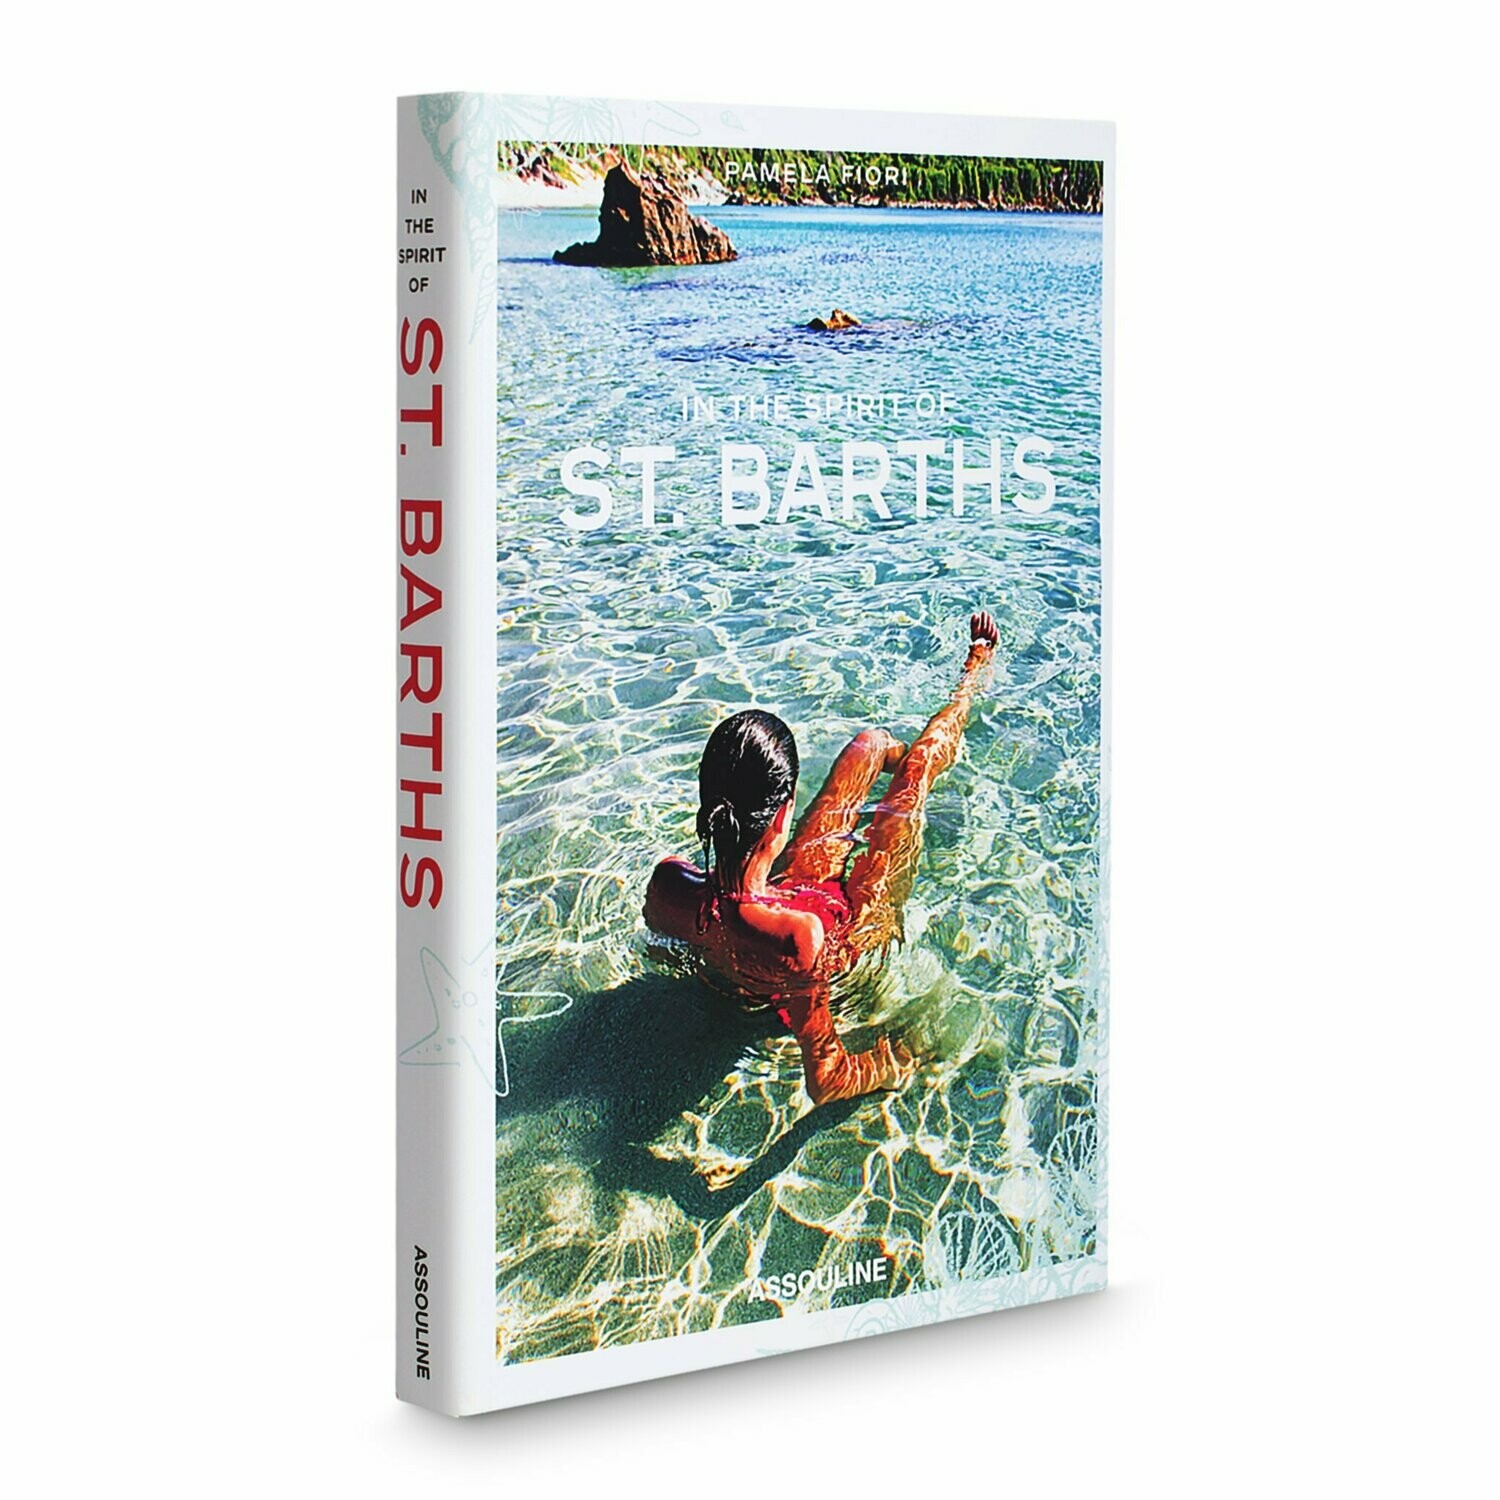 In the Spirit of St Barths